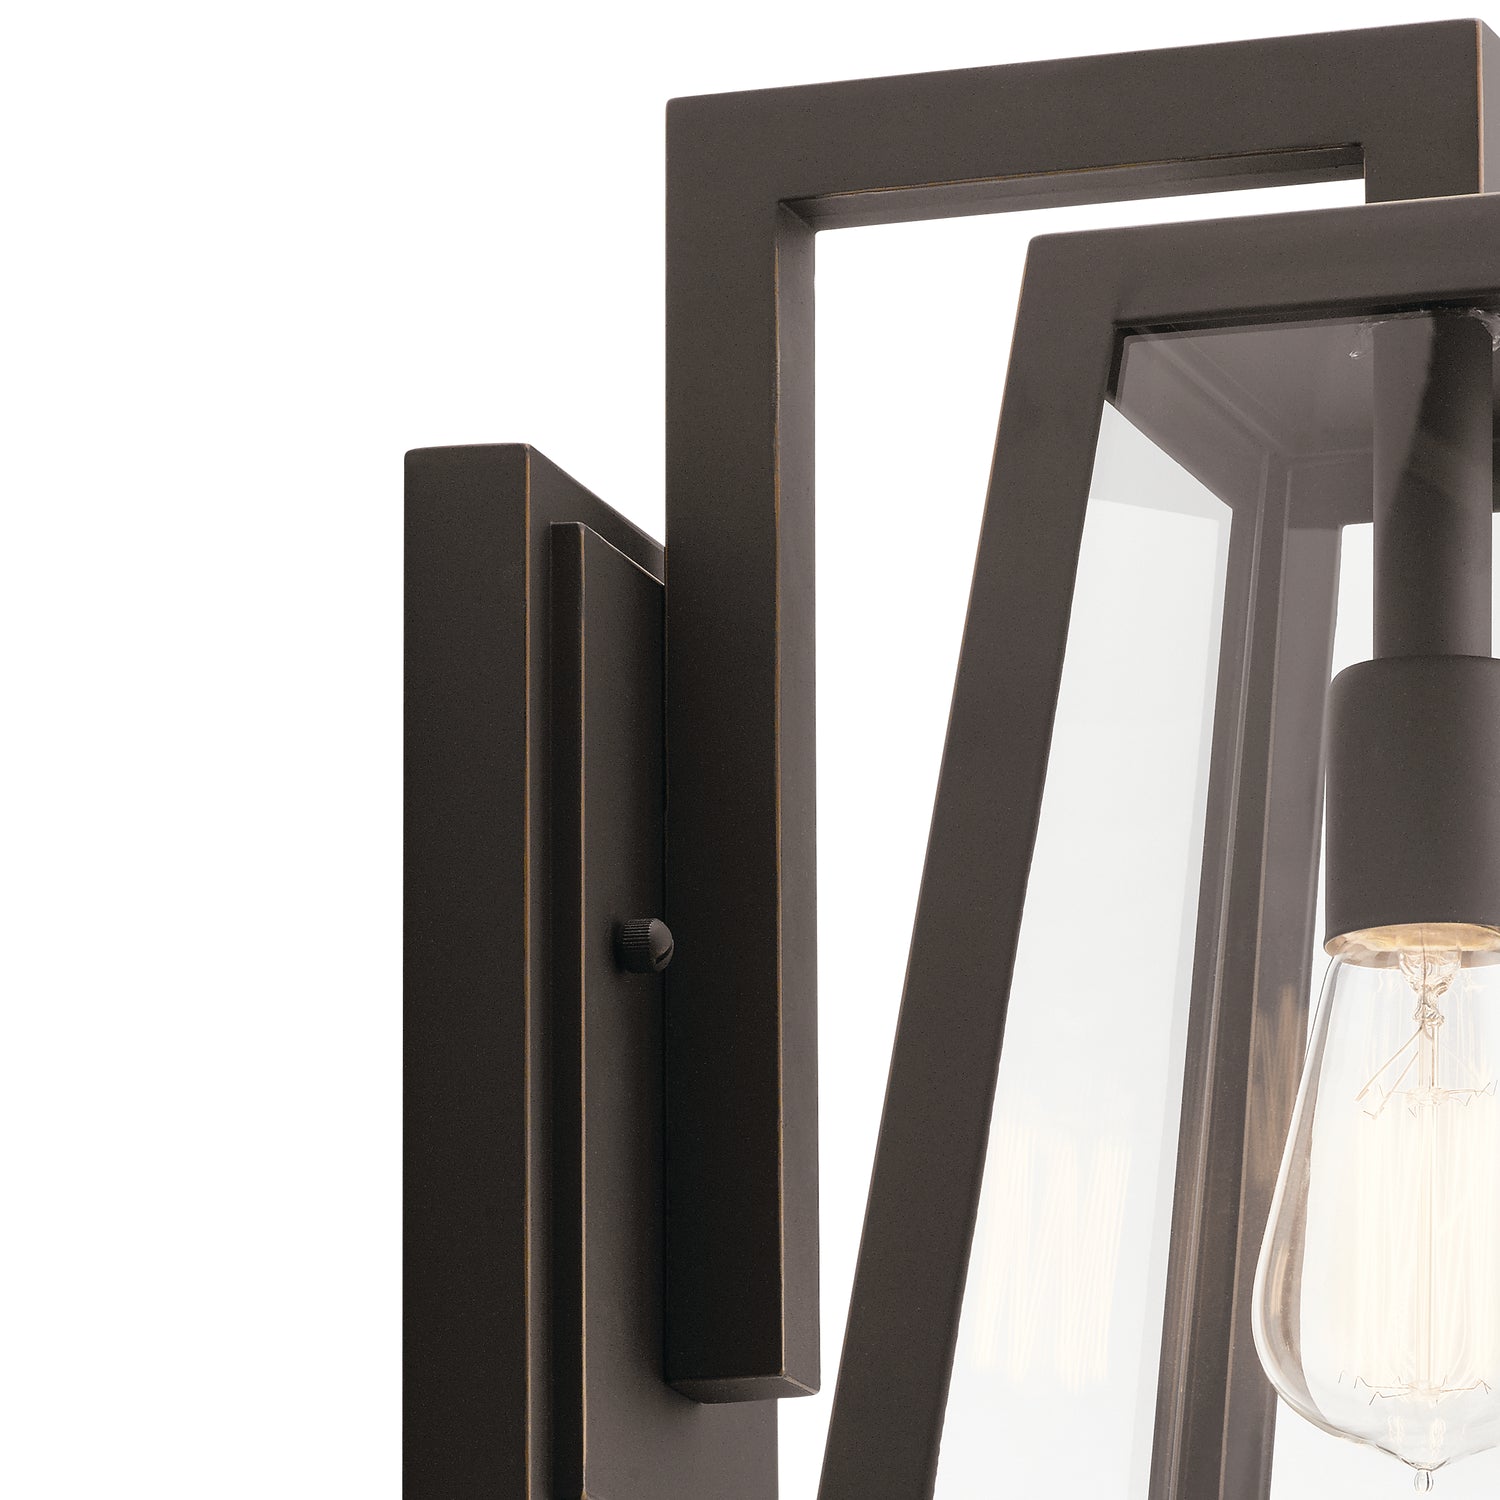 Delison Outdoor Wall Light Rubbed Bronze